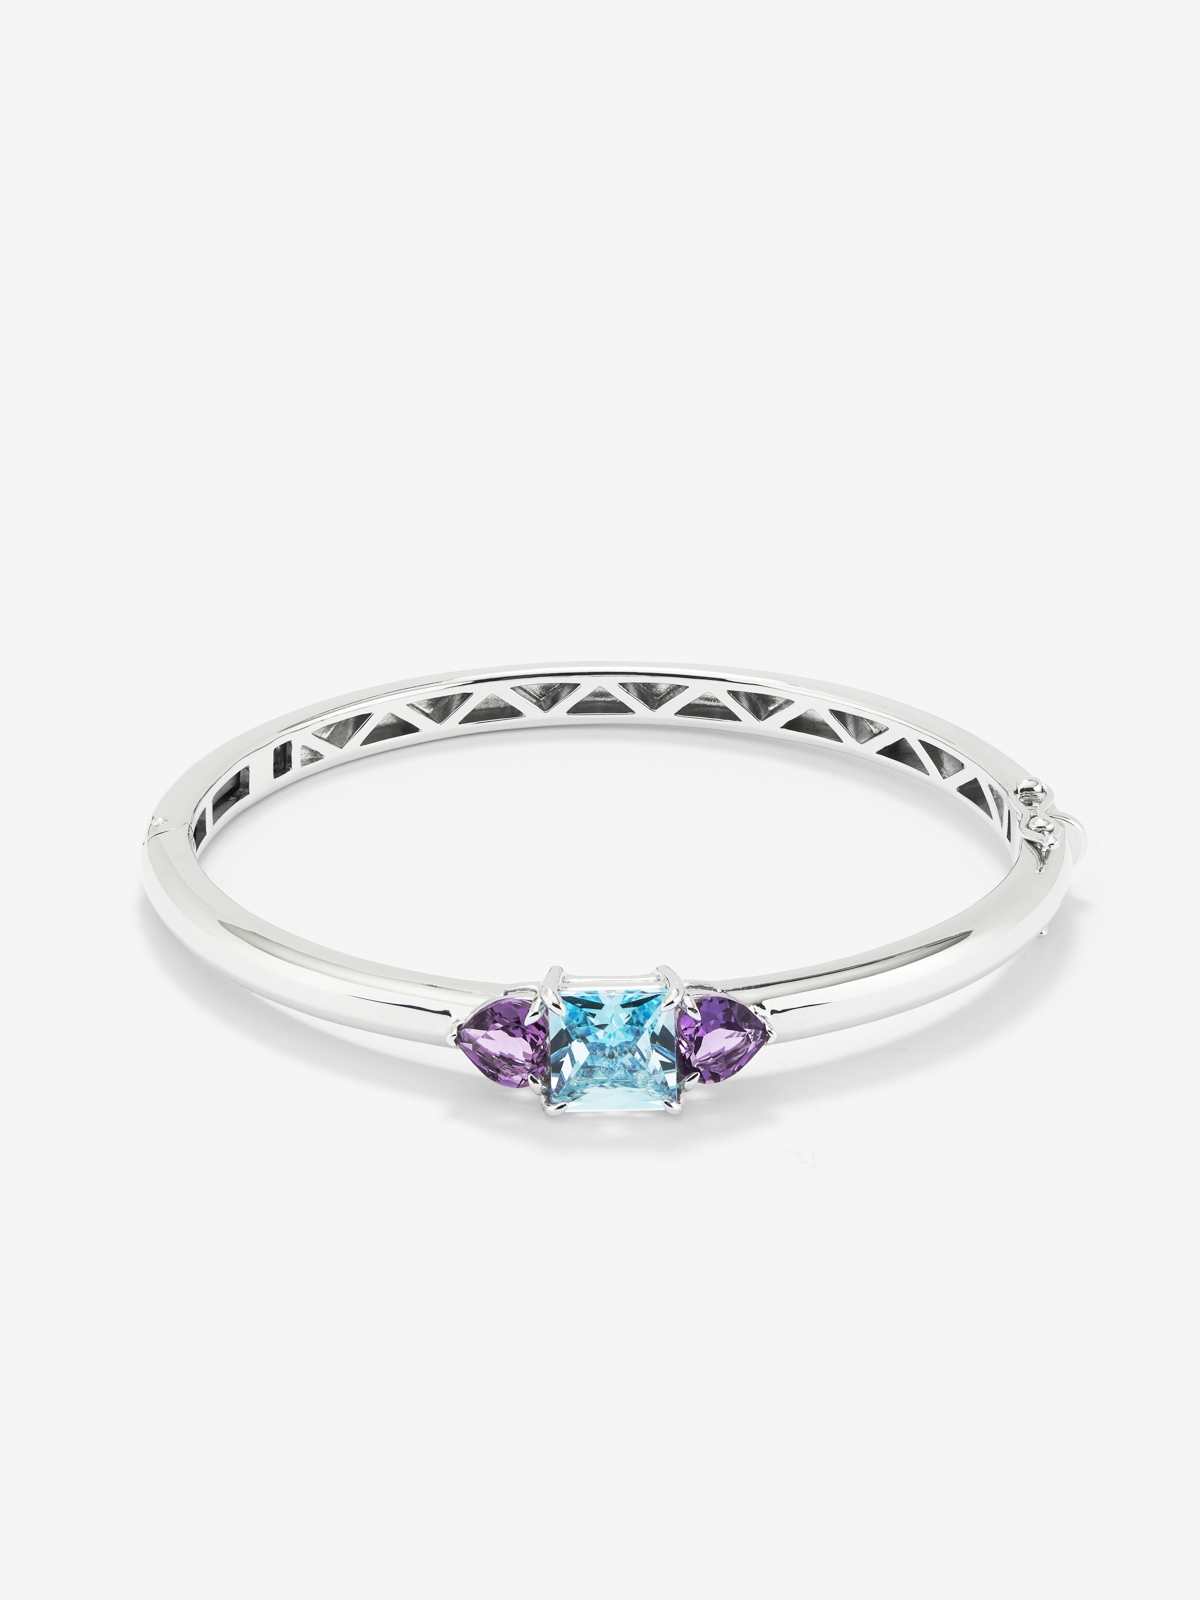 925 Silver rigid bracelet with topaz and amethysts